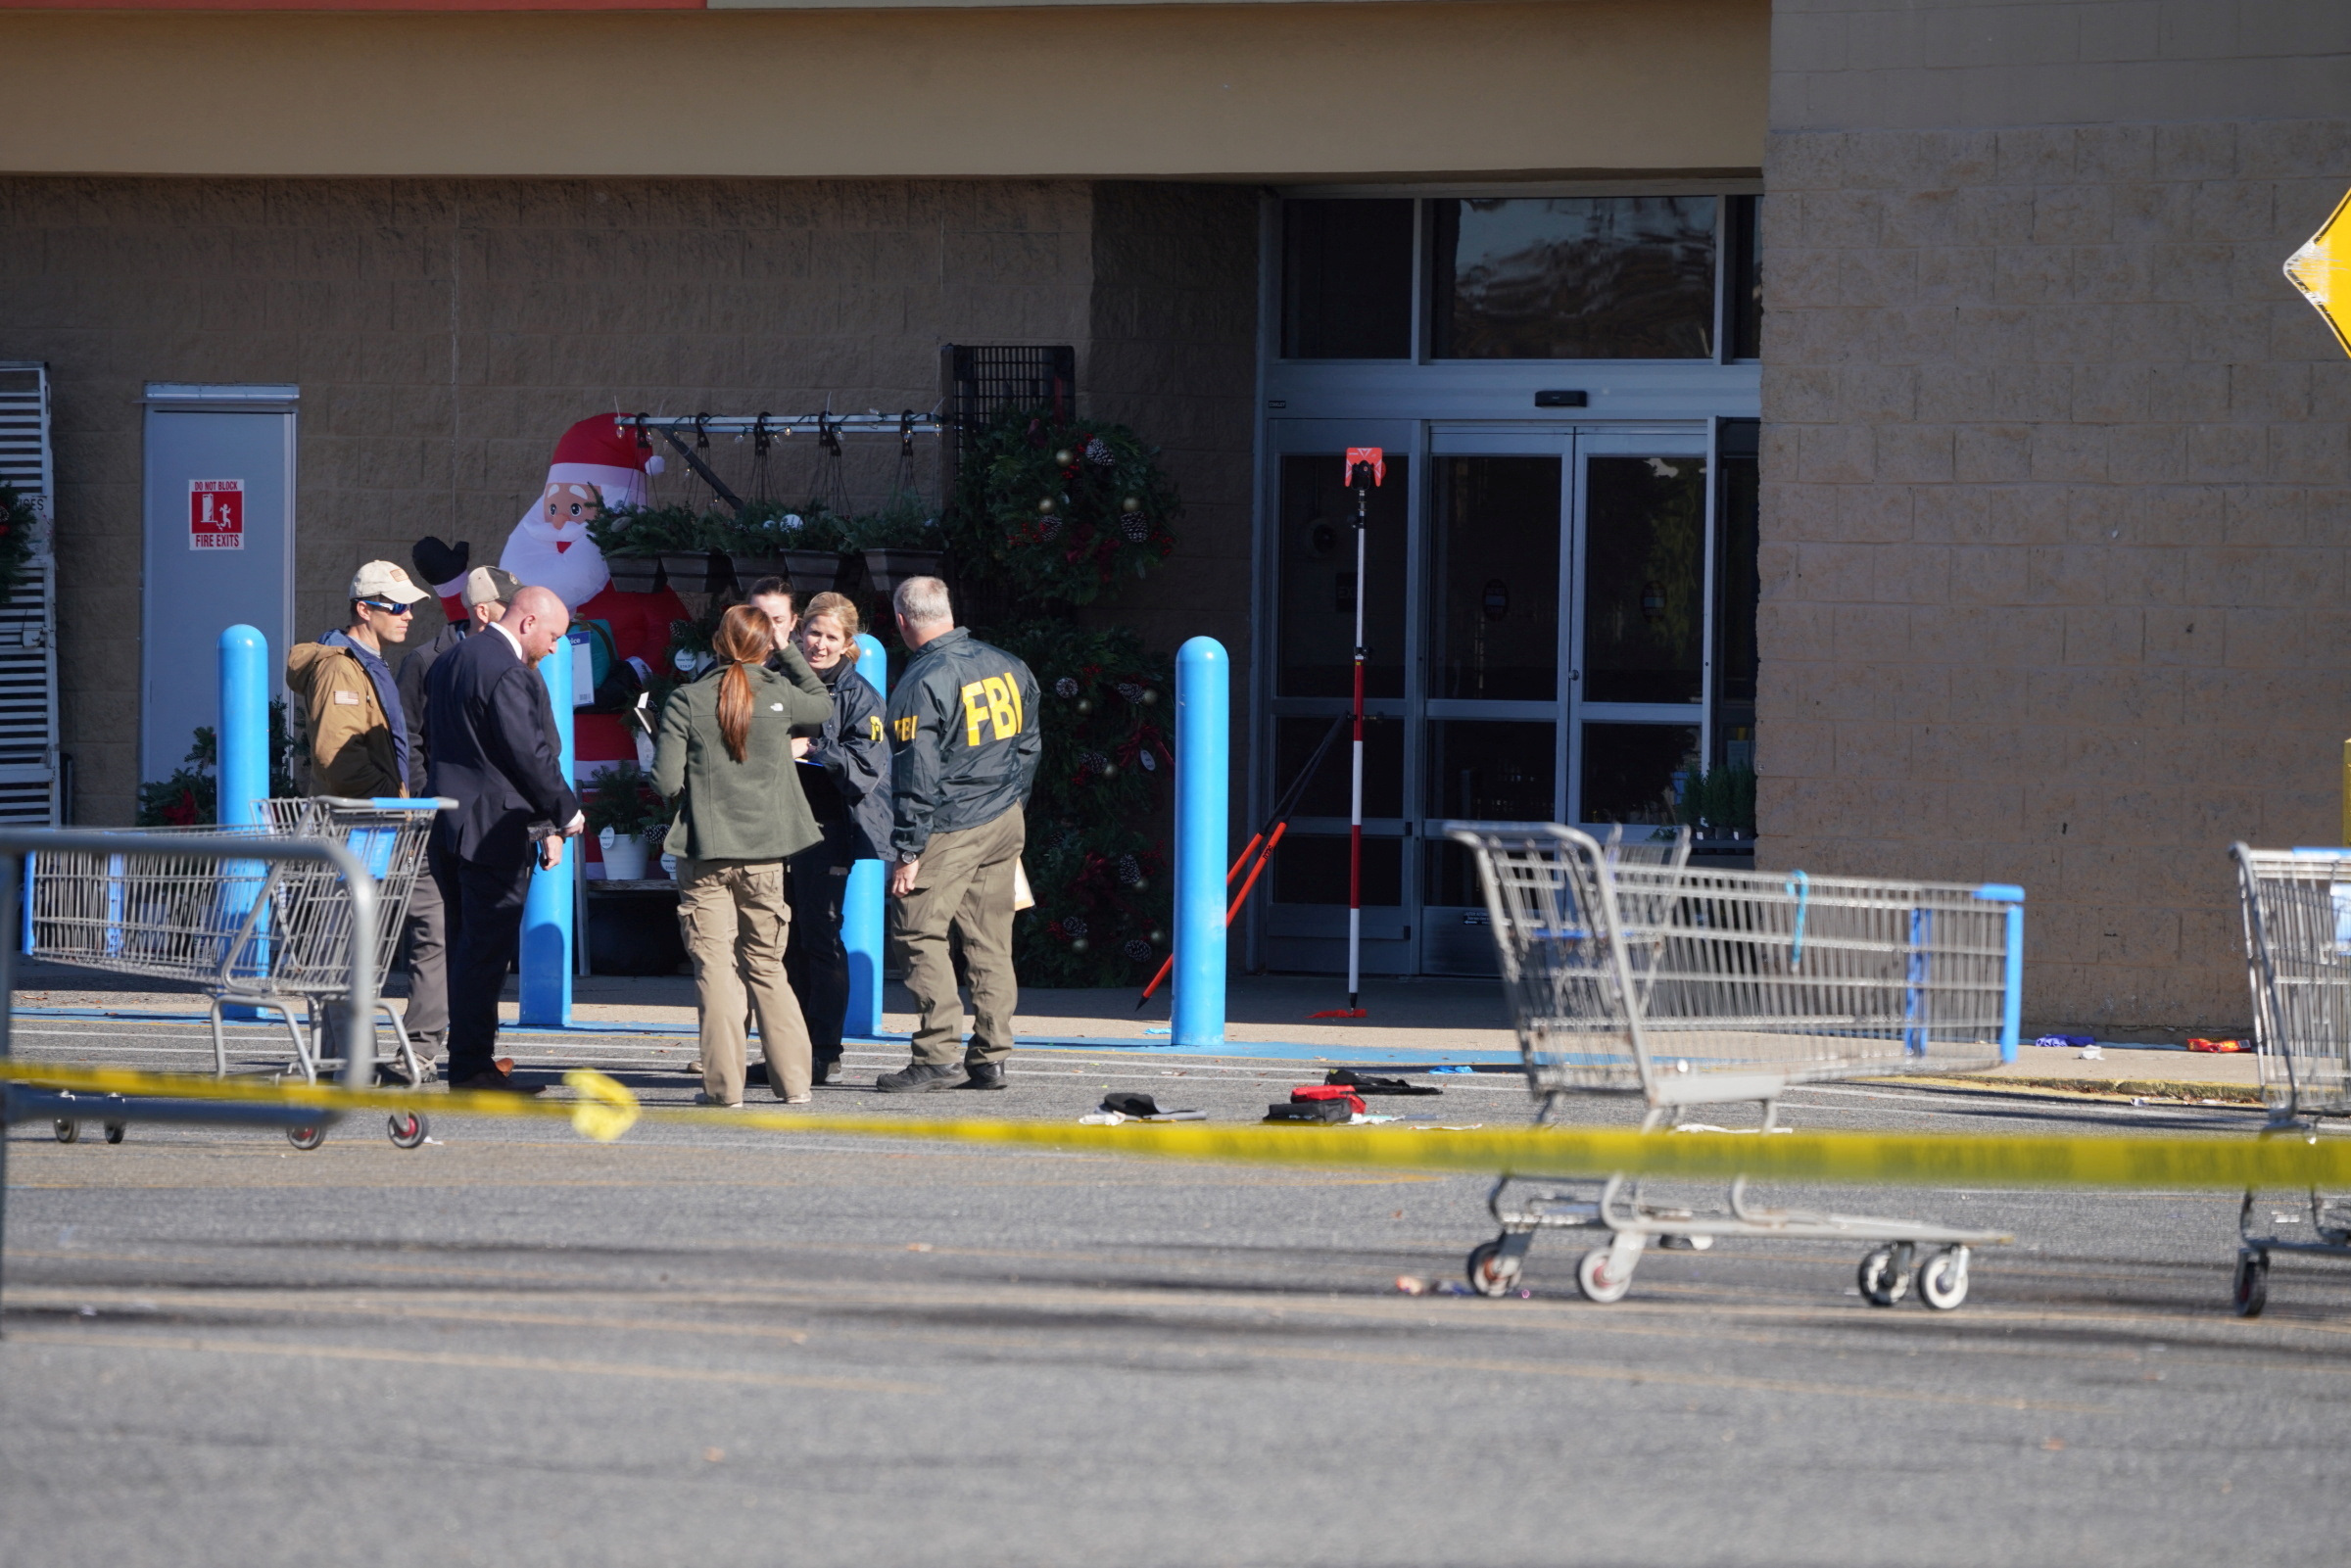 After the mass shooting at the Walmart in Chesapeake